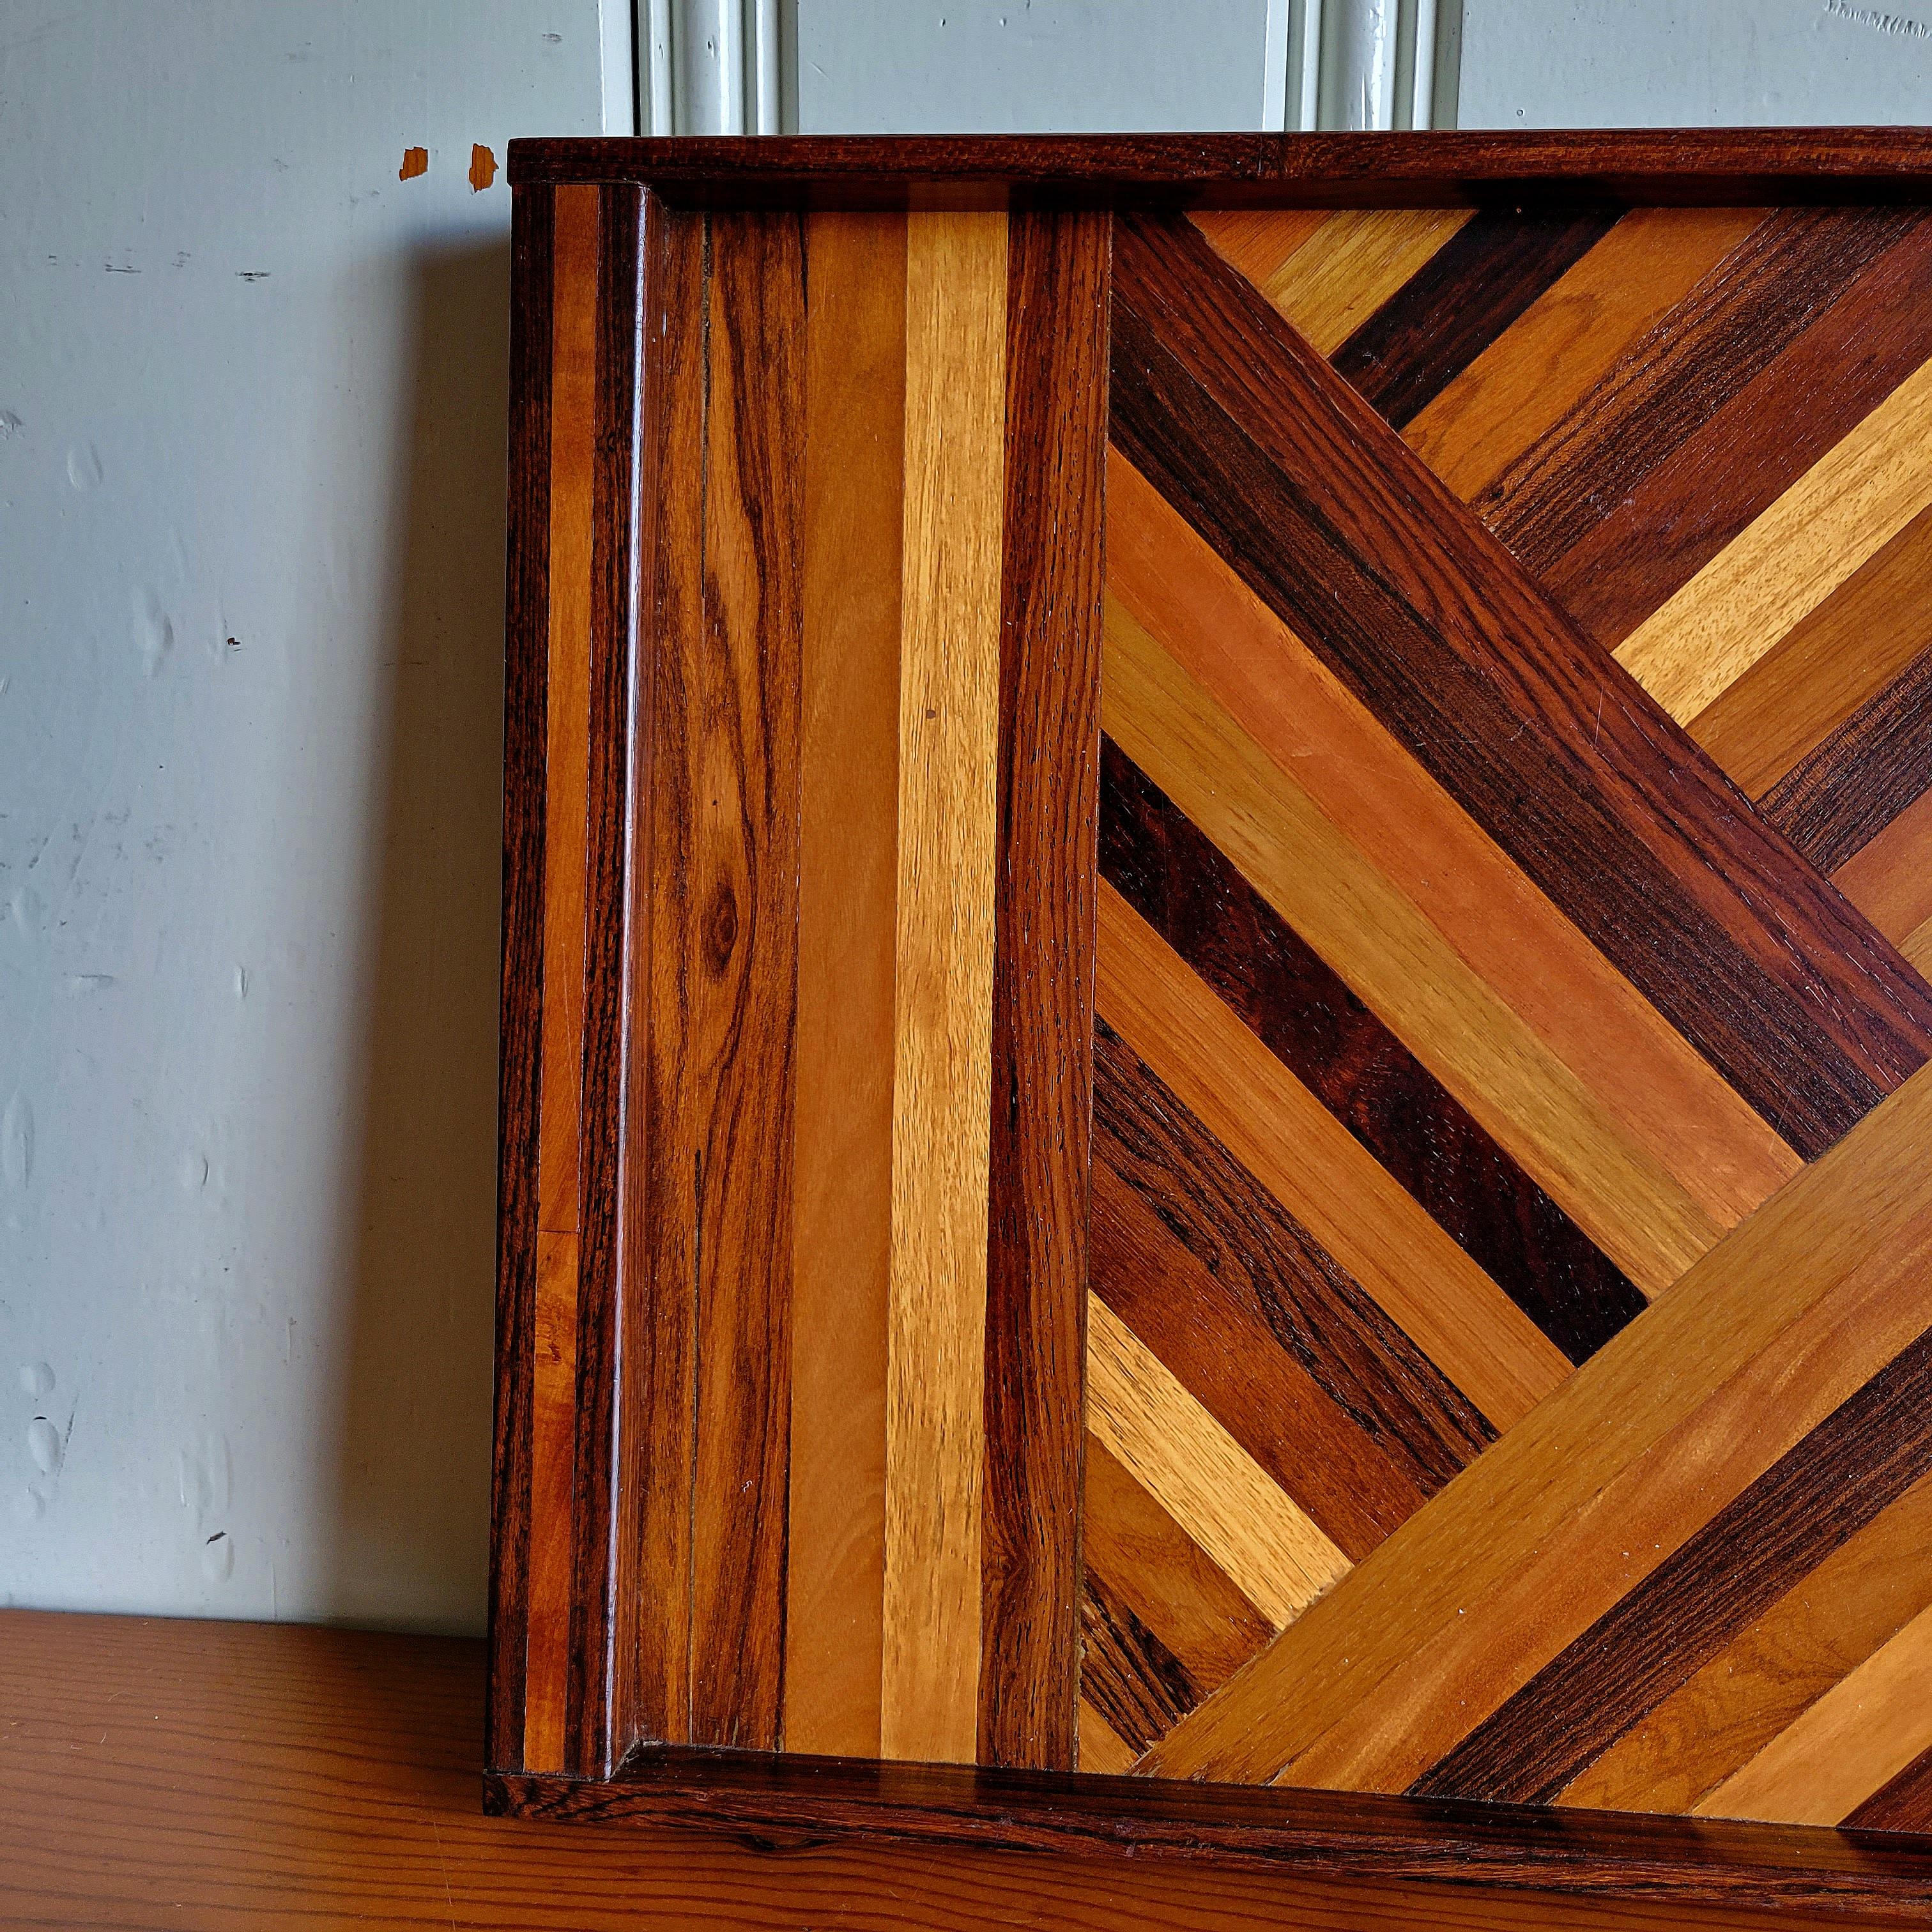 Don Shoemaker was an American ex-pat who moved to Mexico and started a huge furniture manufacturing facility that is still running to this day. 

This a more obscure large version of the tray. Comprised of multiple species of exotic woods cut at